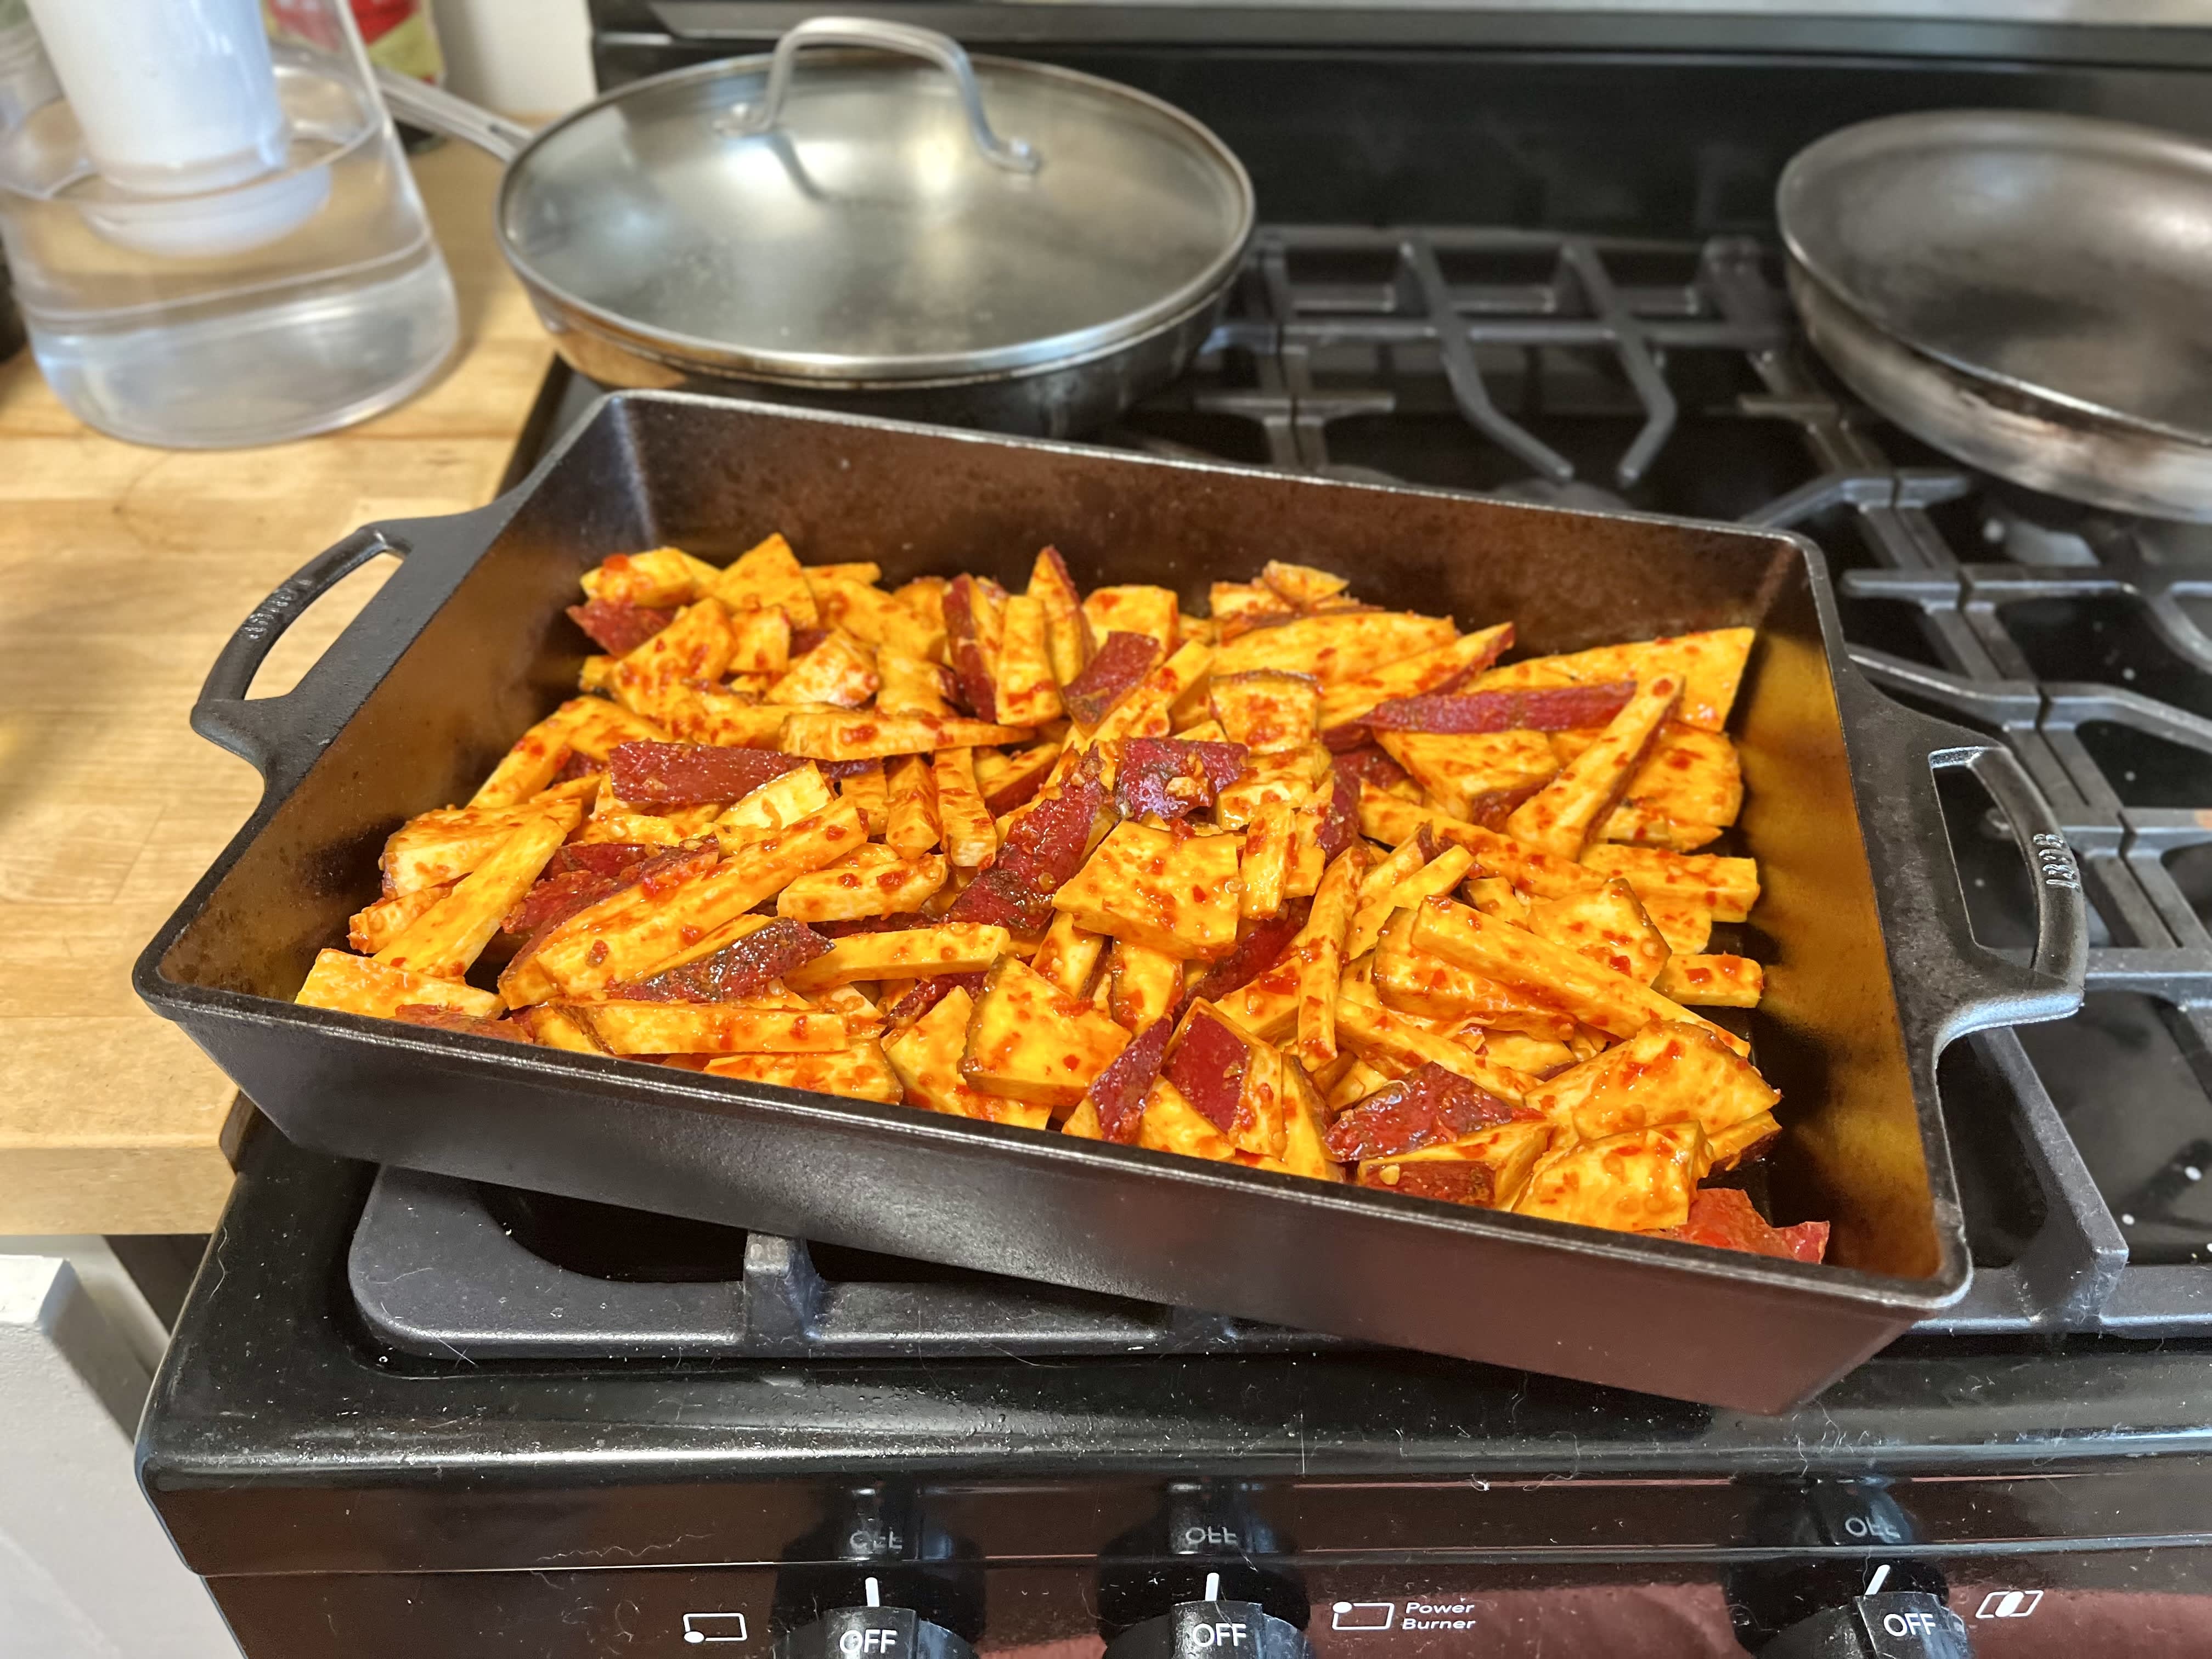 Why I Love the Lodge Cast-Iron Casserole Pan: Tried & Tested